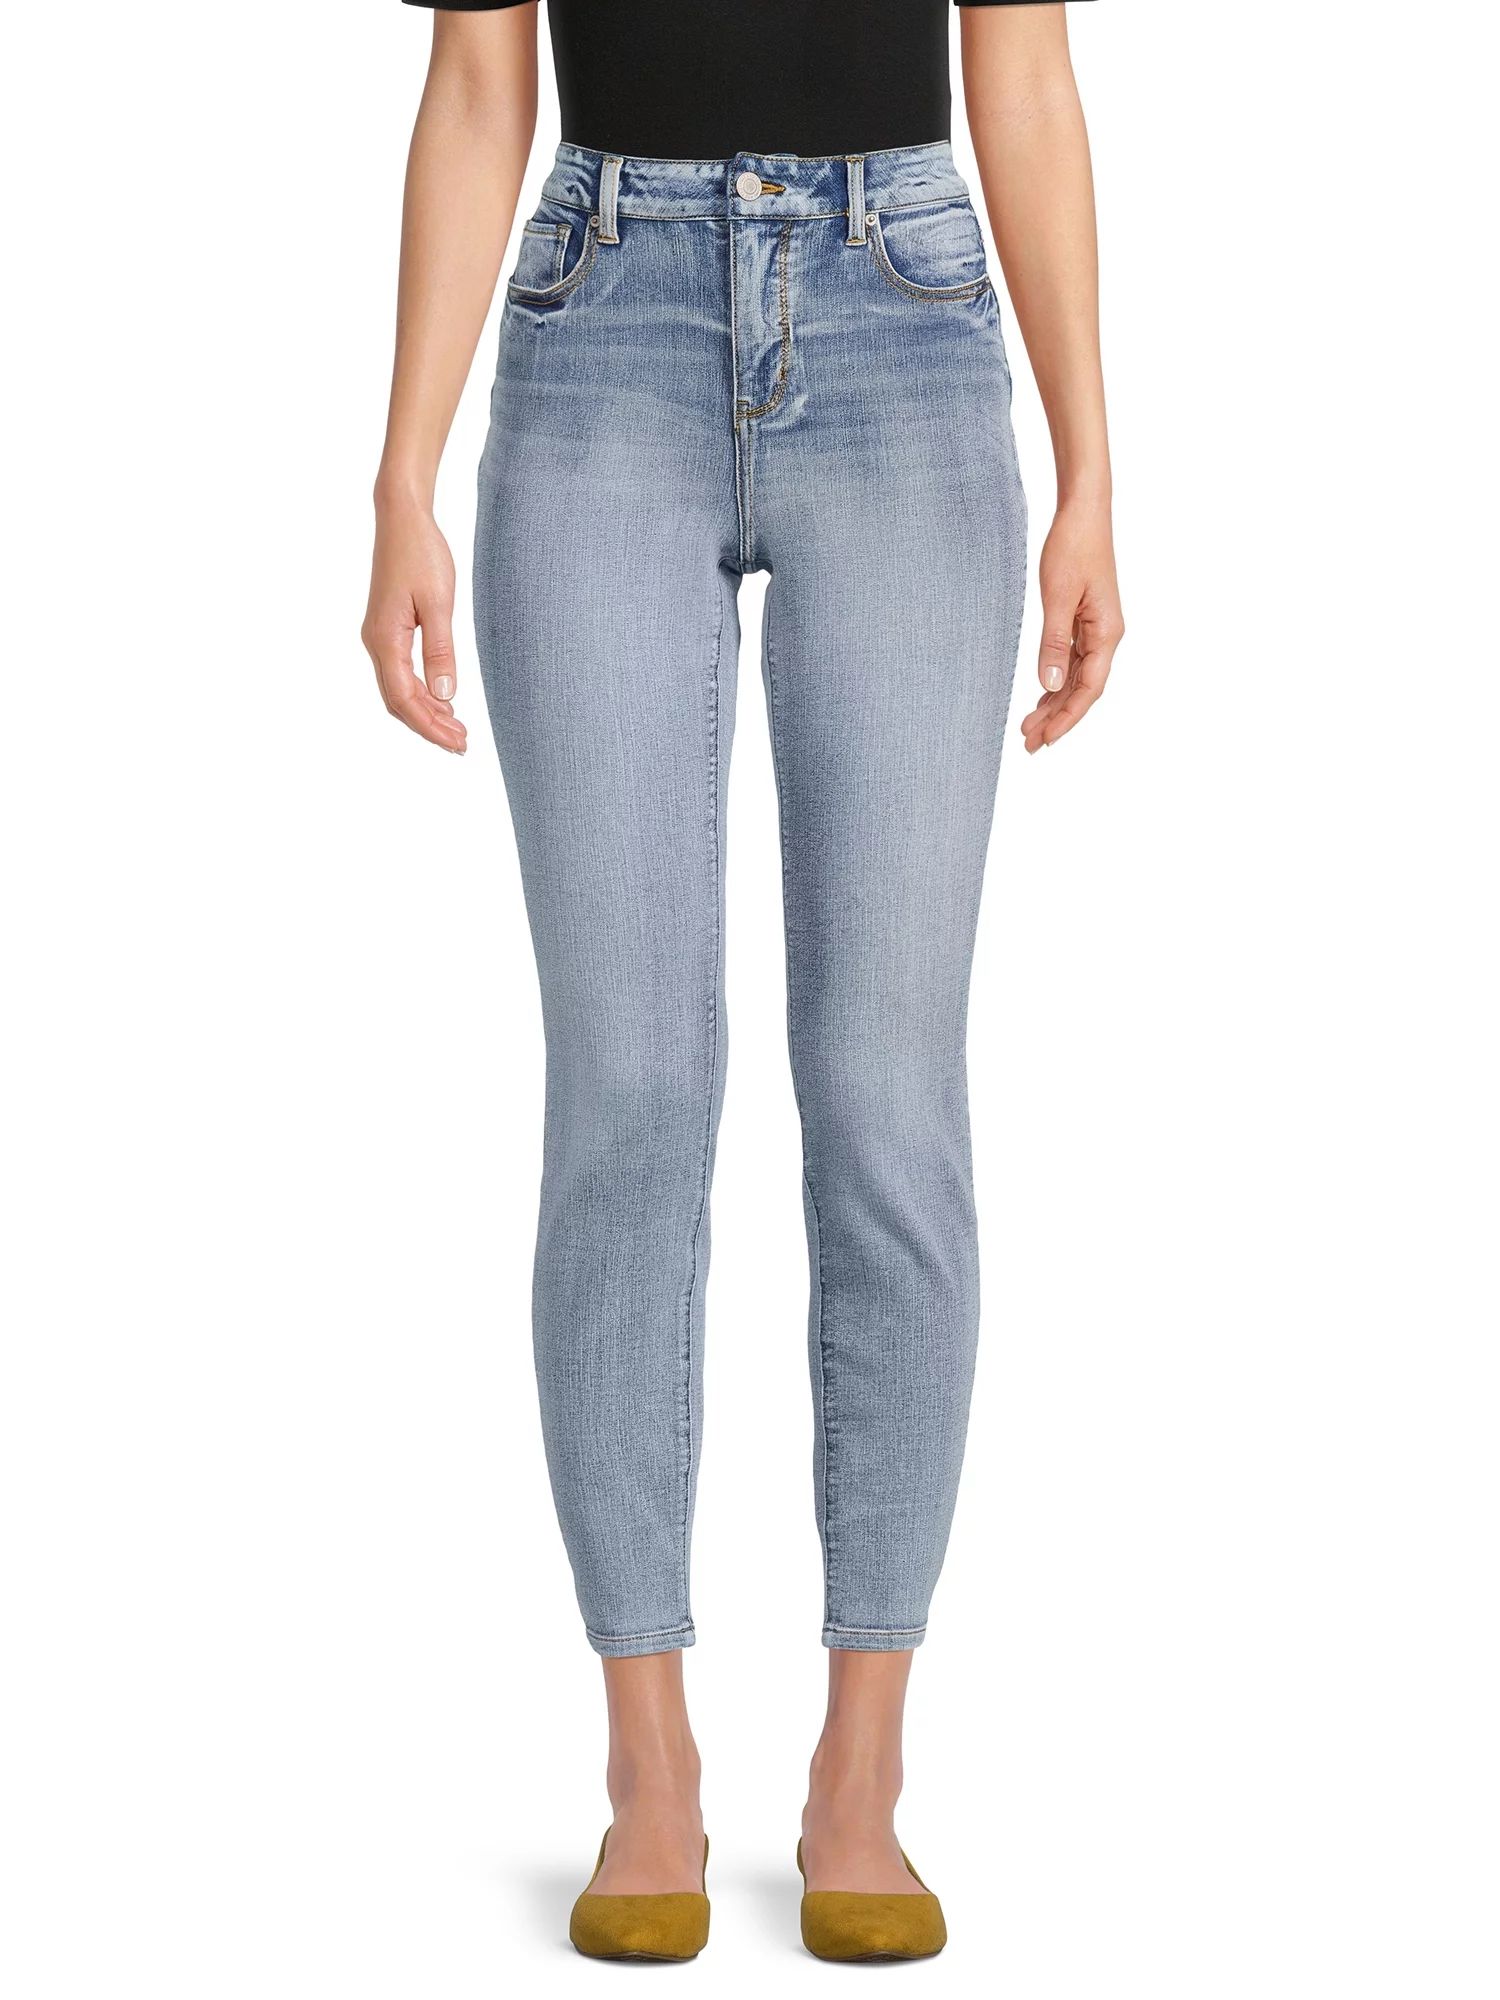 Time and Tru Women's High Rise Skinny Jeans, 29" Inseam for Regular, Sizes 2-20 | Walmart (US)